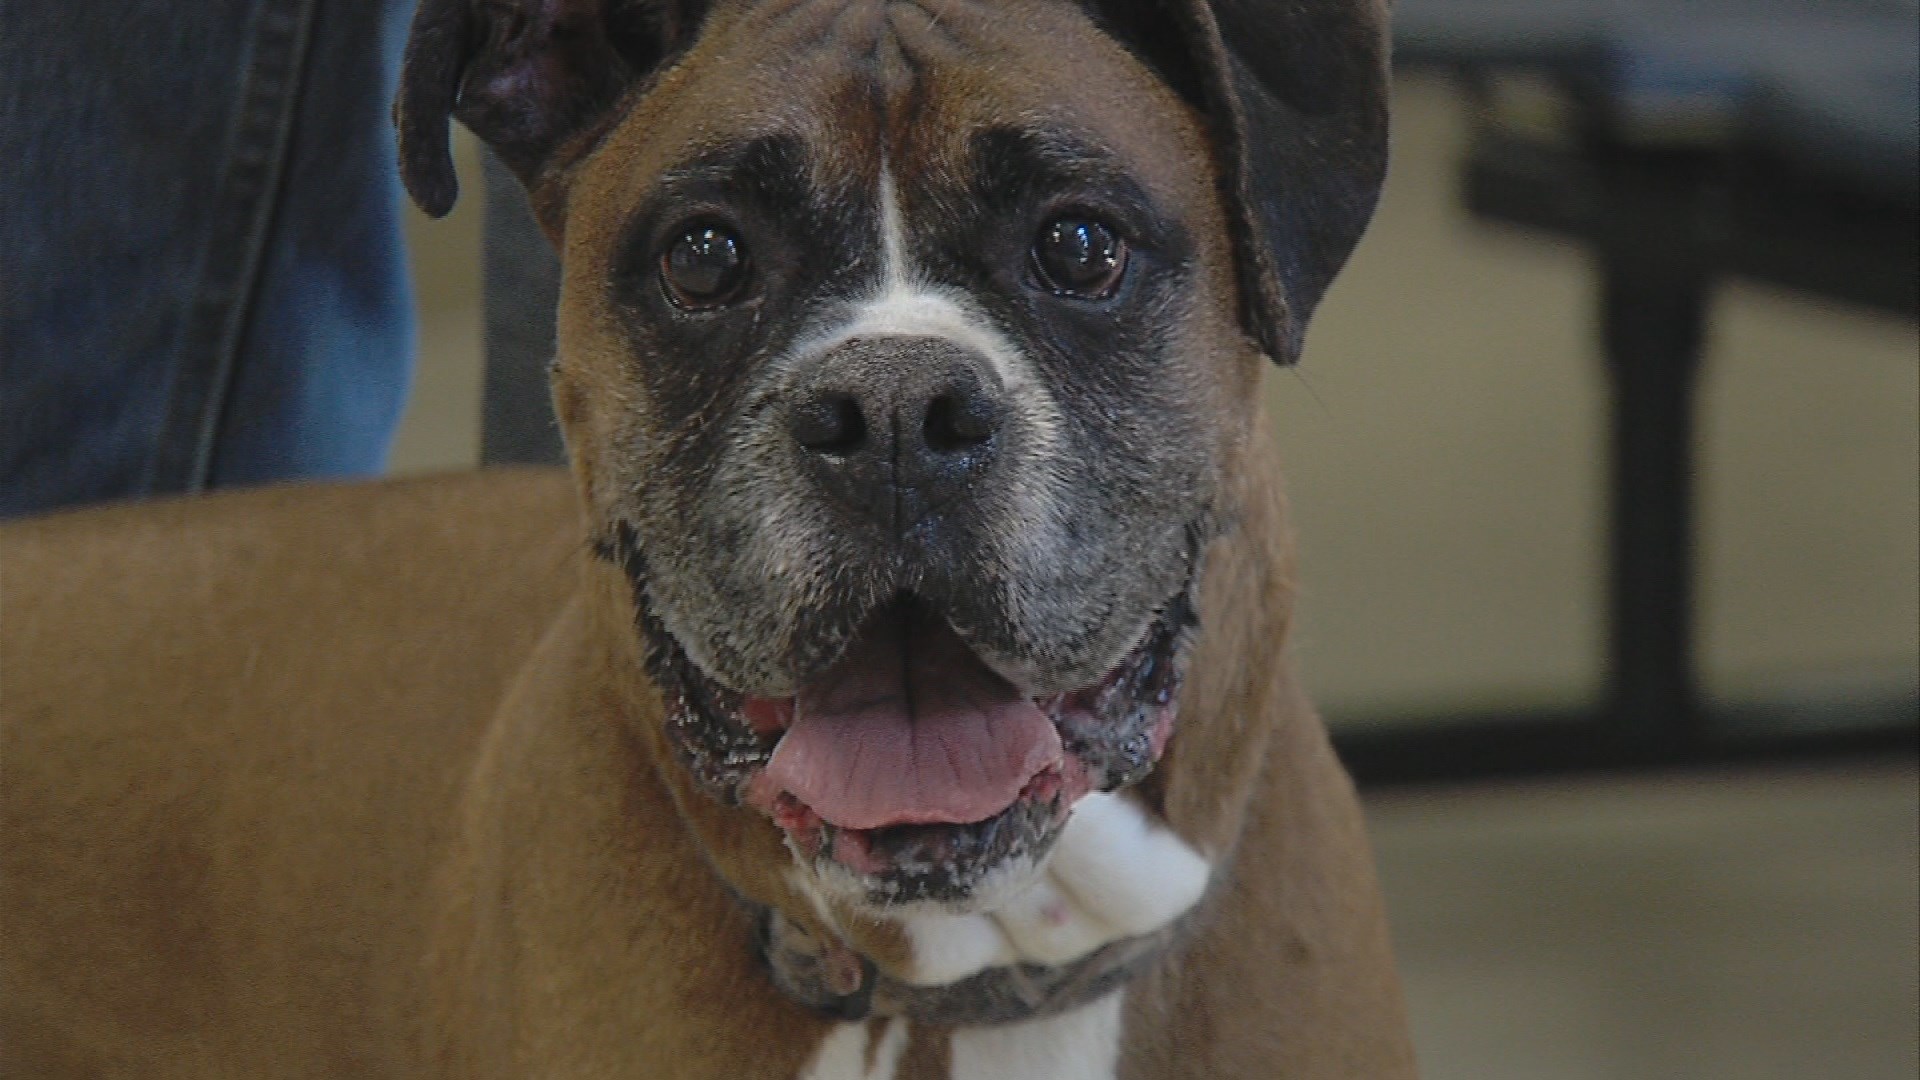 Pet adopter gives warning to others